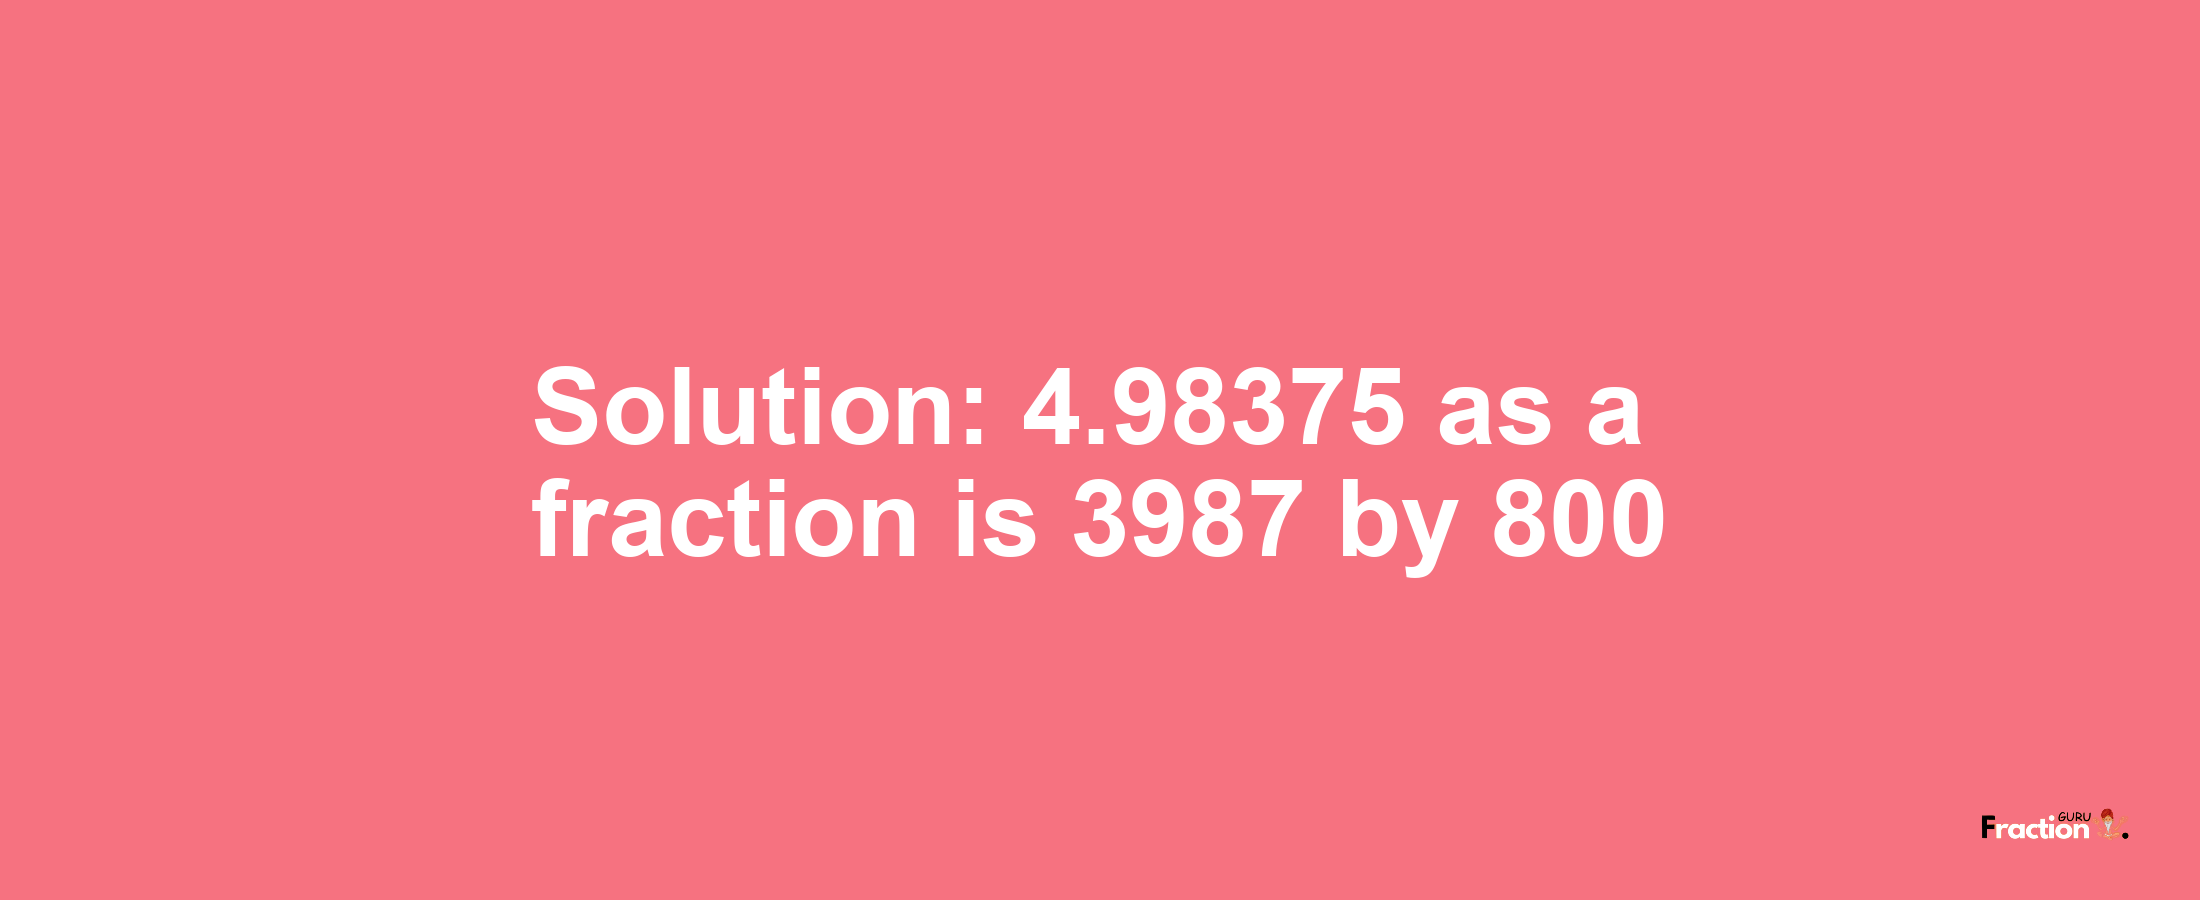 Solution:4.98375 as a fraction is 3987/800